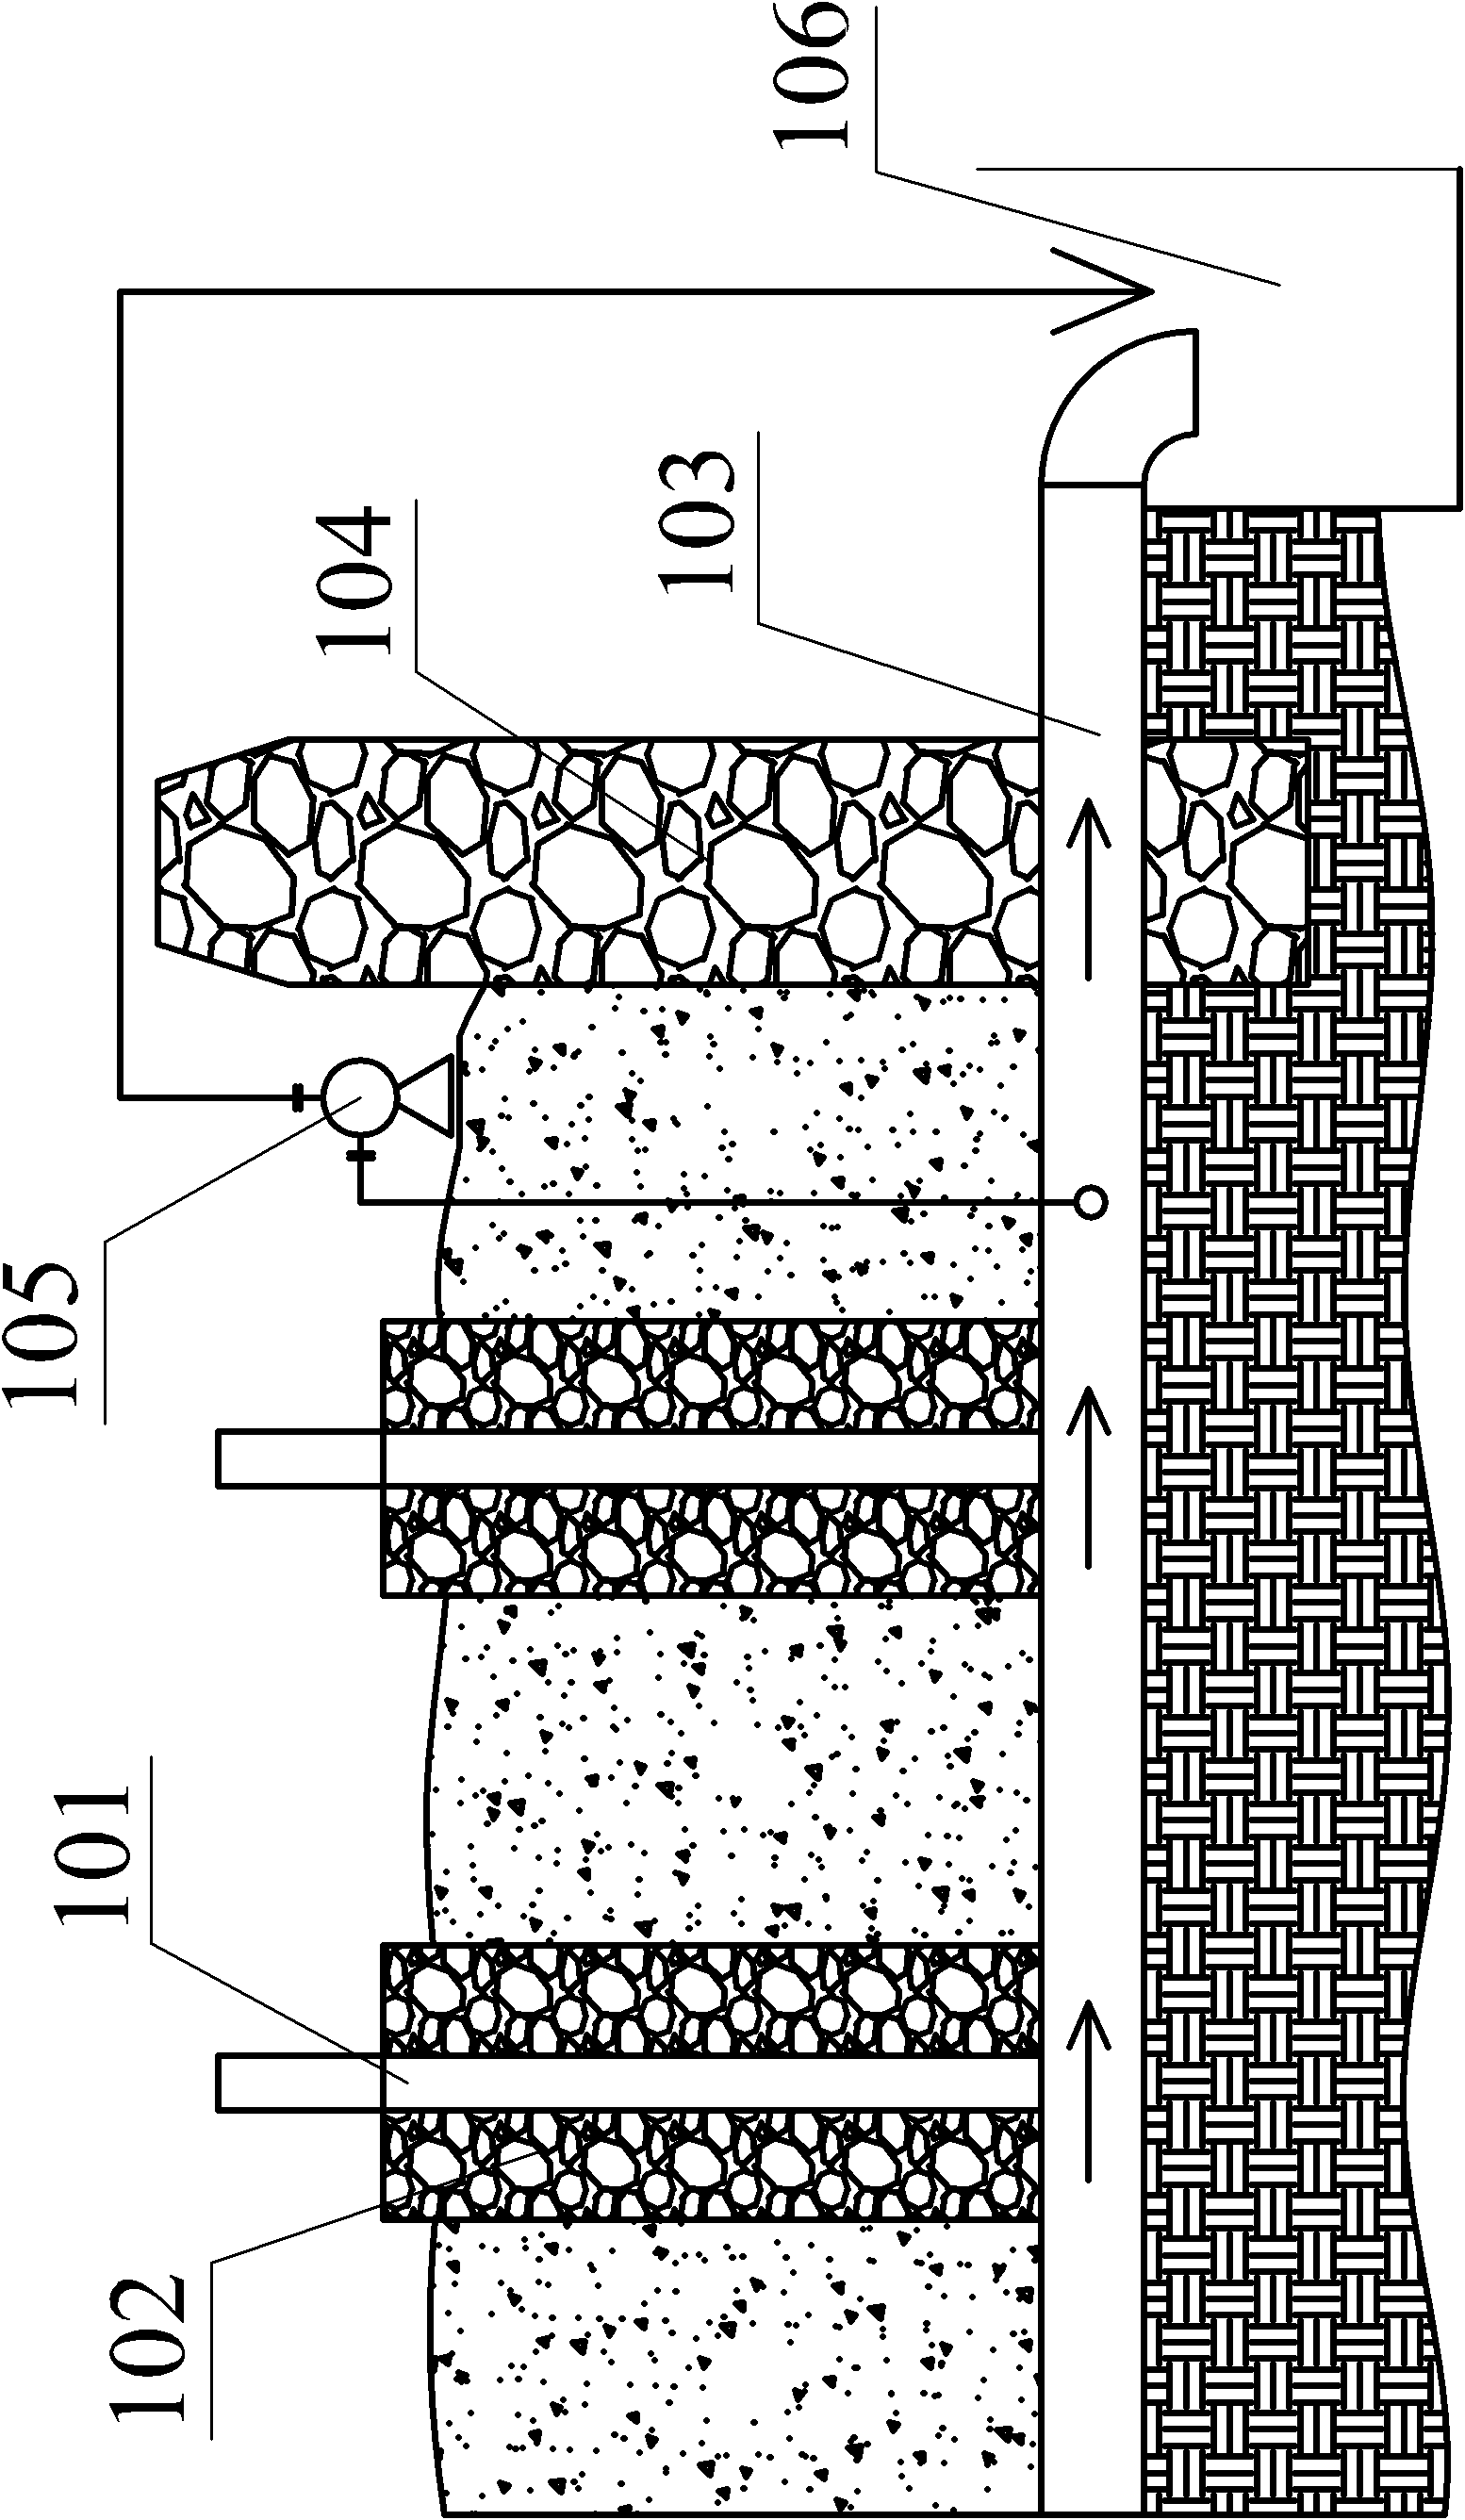 Large-sized material storage yard gas guide and discharge well and well cementing construction method